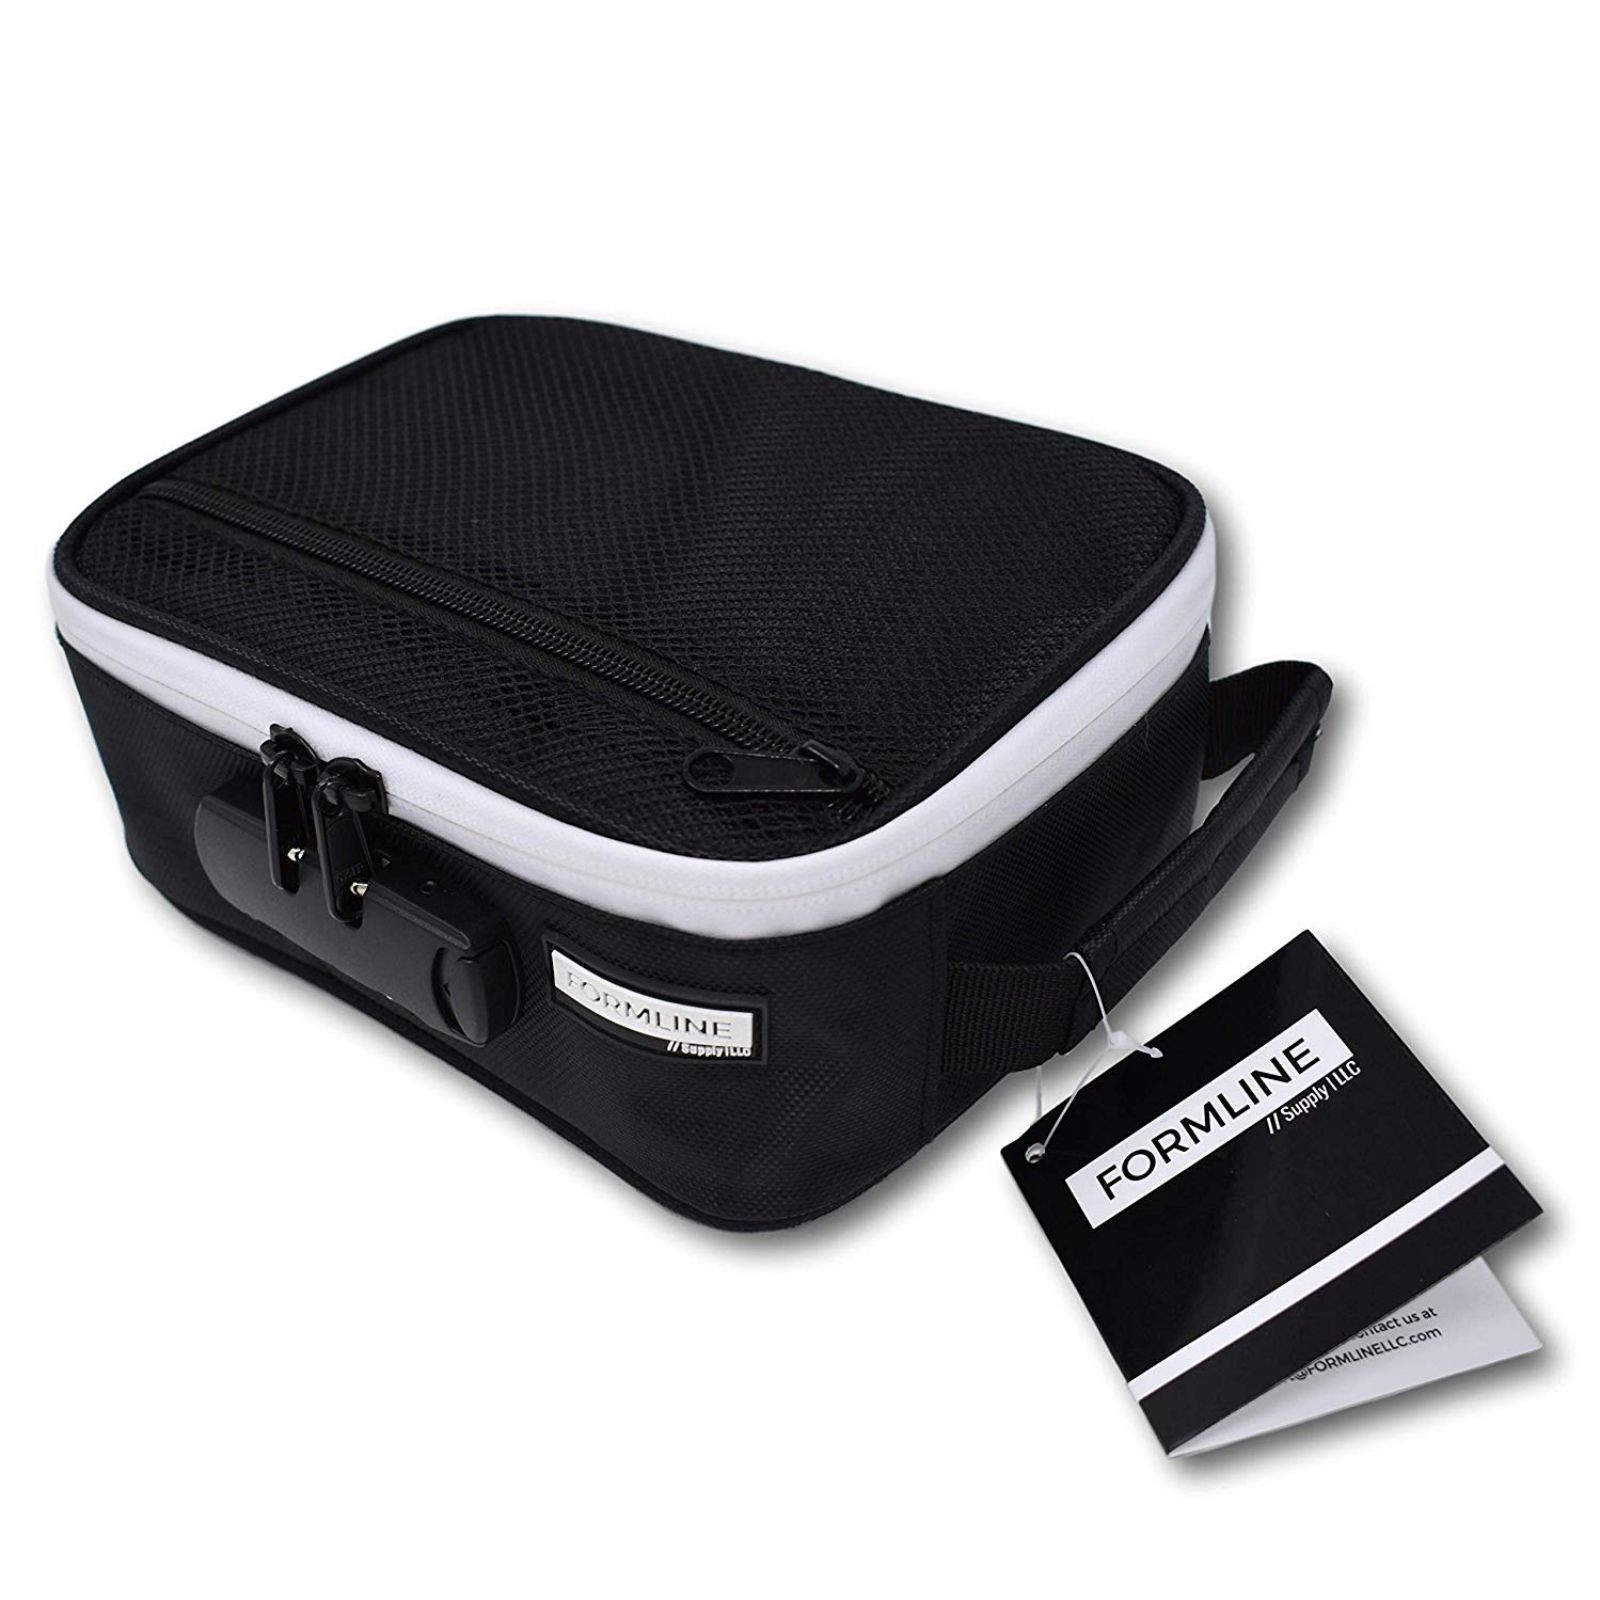 Smell Proof Case with Combination Lock - 8"x6"x3" - by Formline Supply